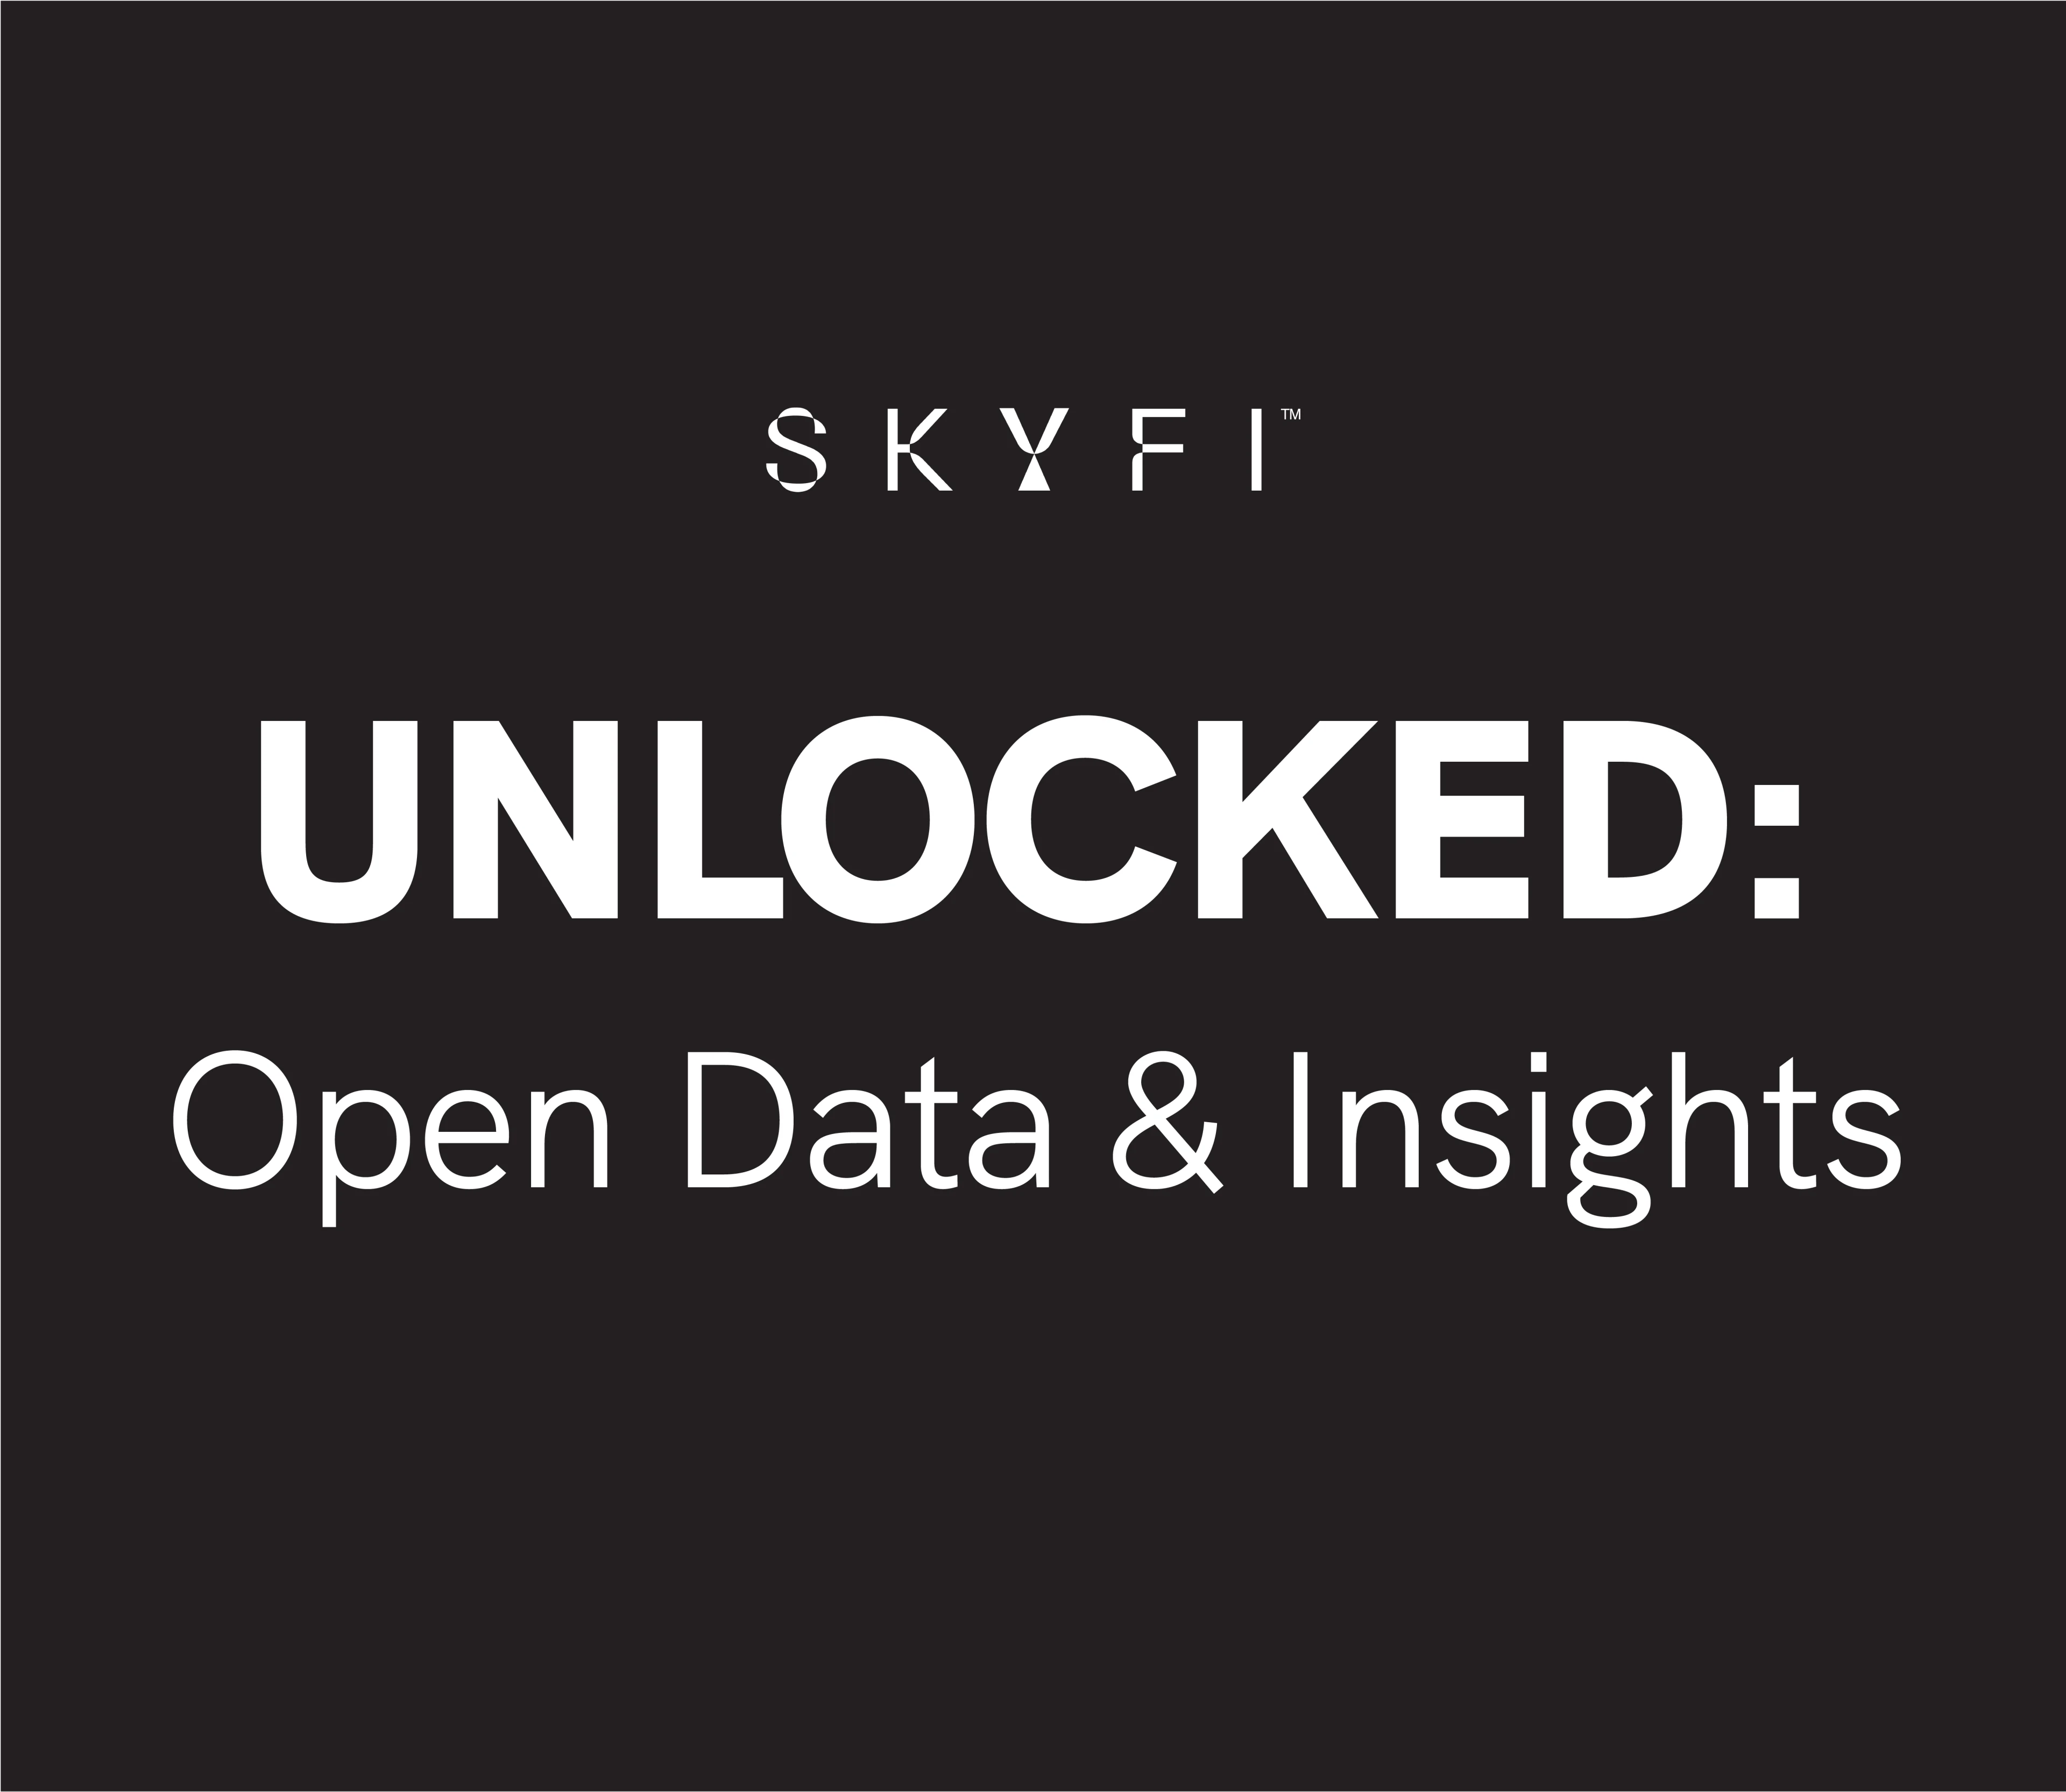 open data and insights unlocked